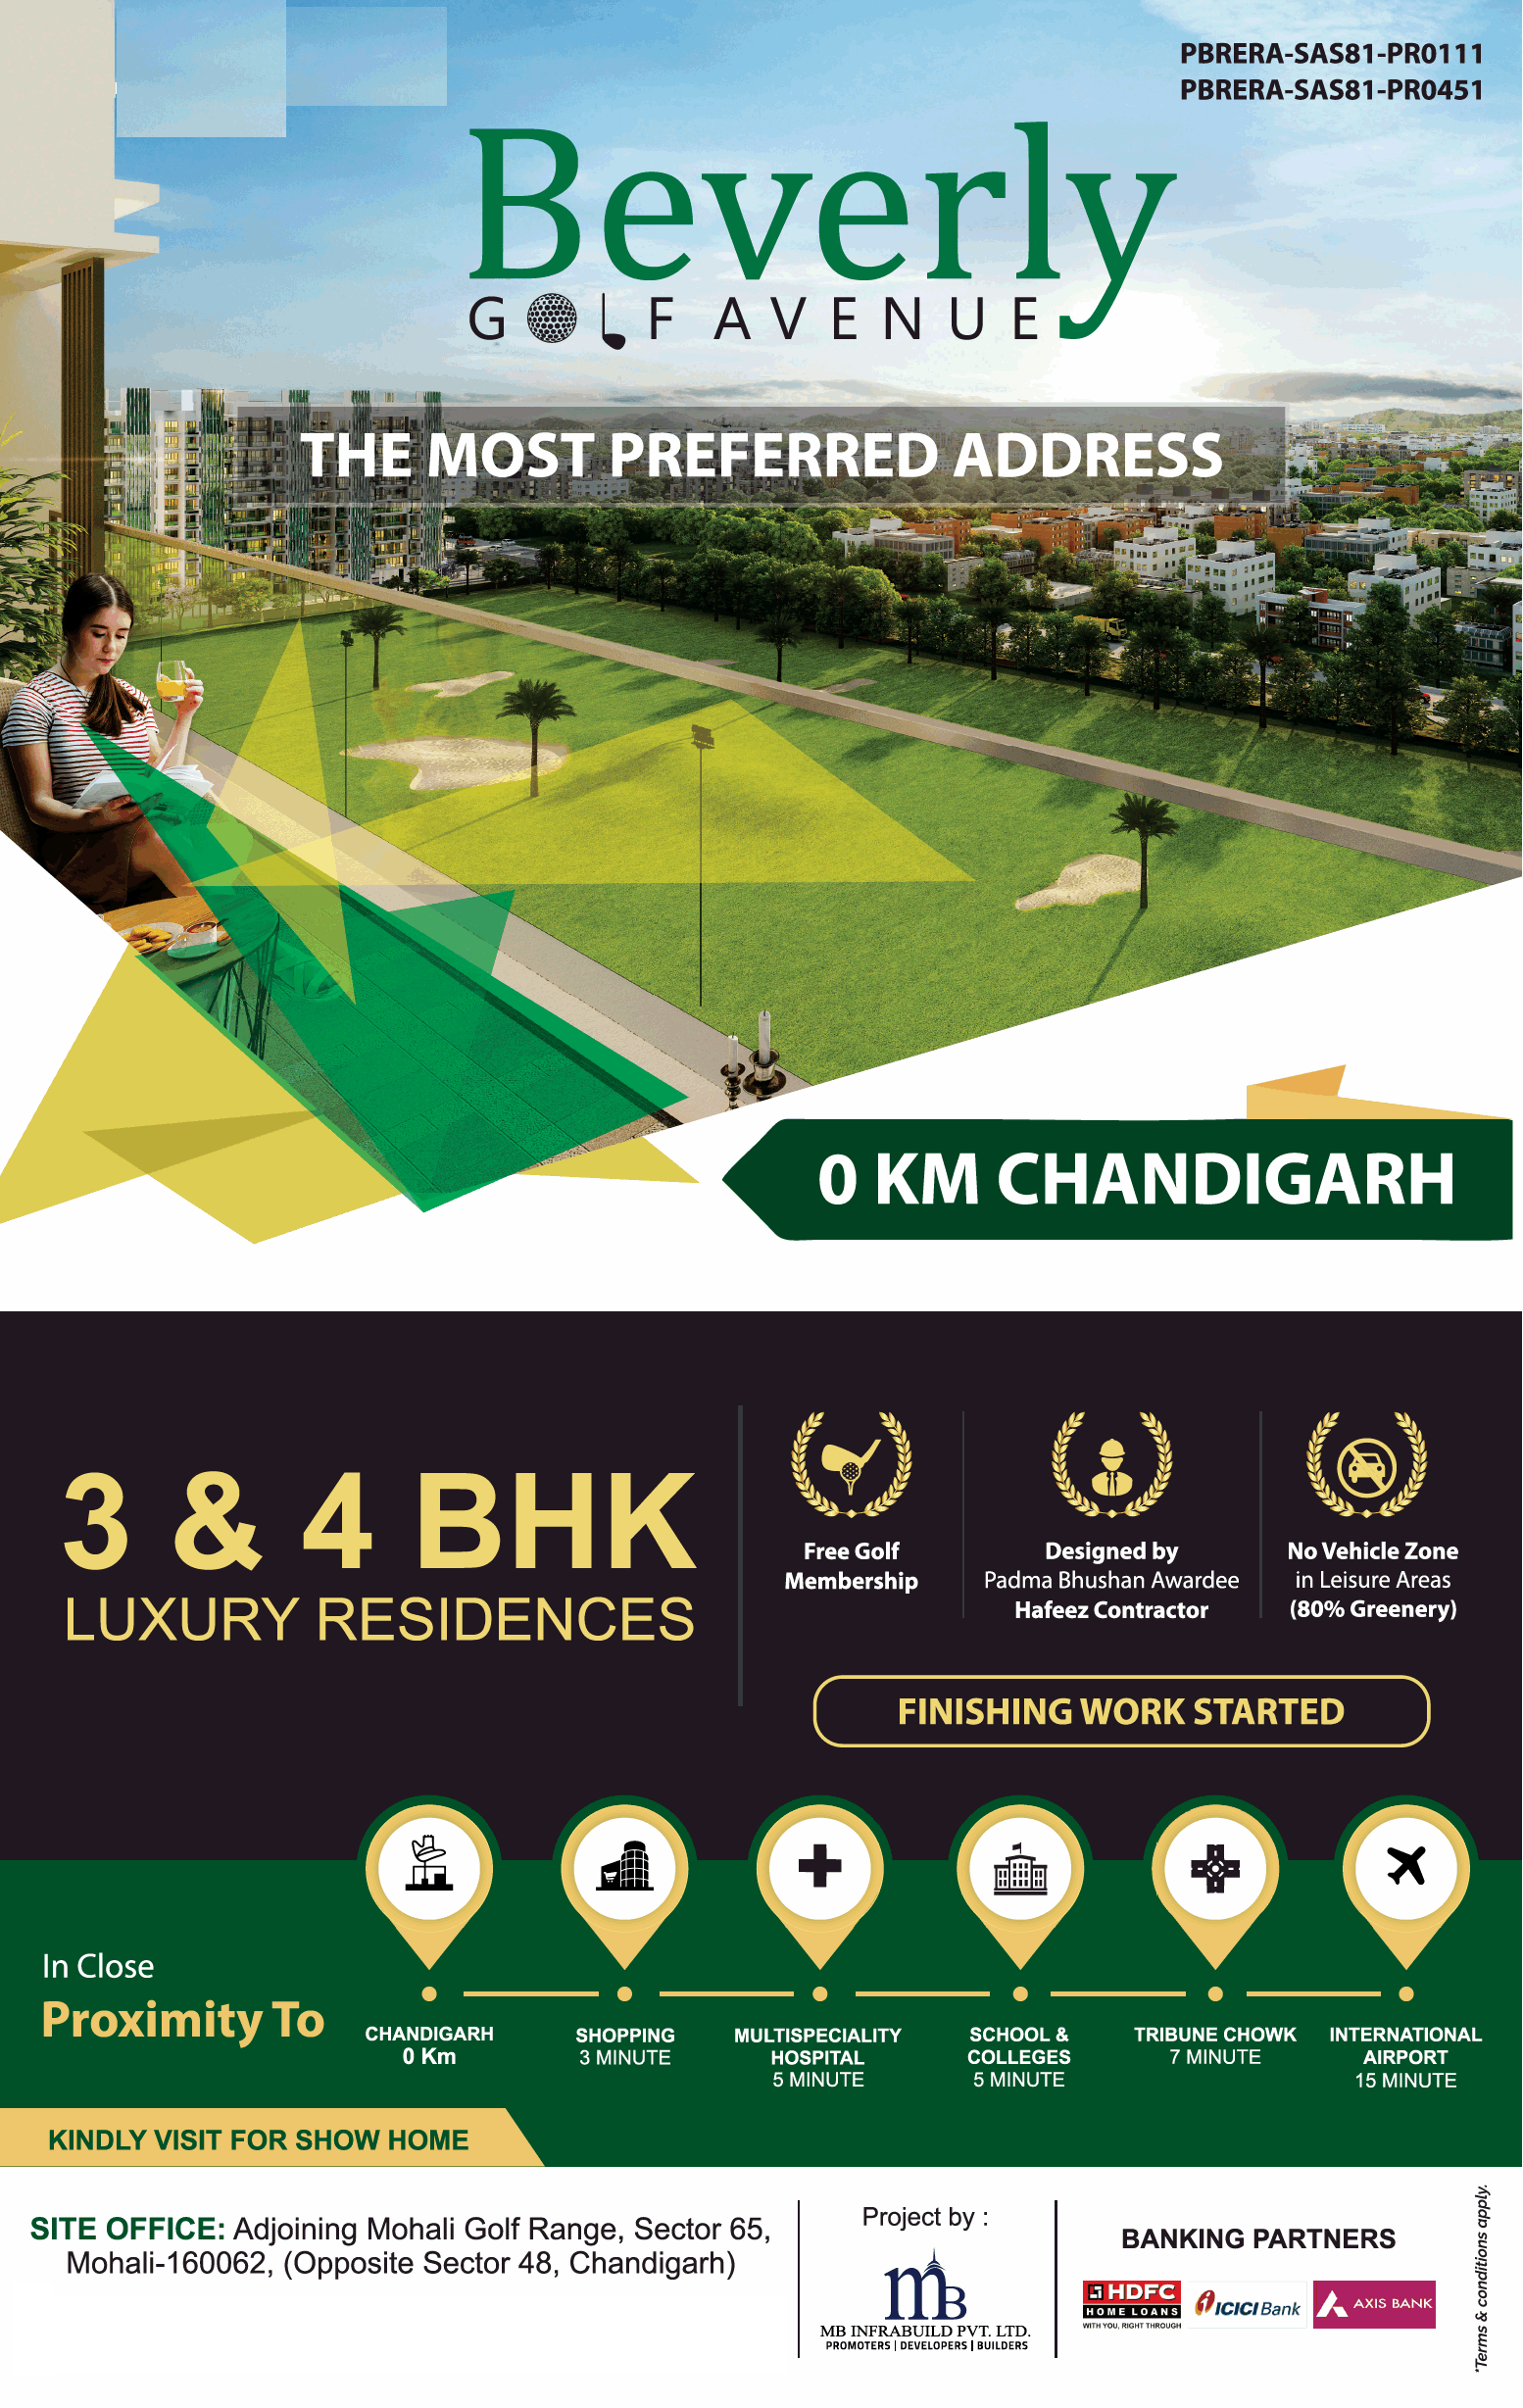 3 & 4 BHK Luxury Residences at MB Beverly Golf Avenue, Mohali Update